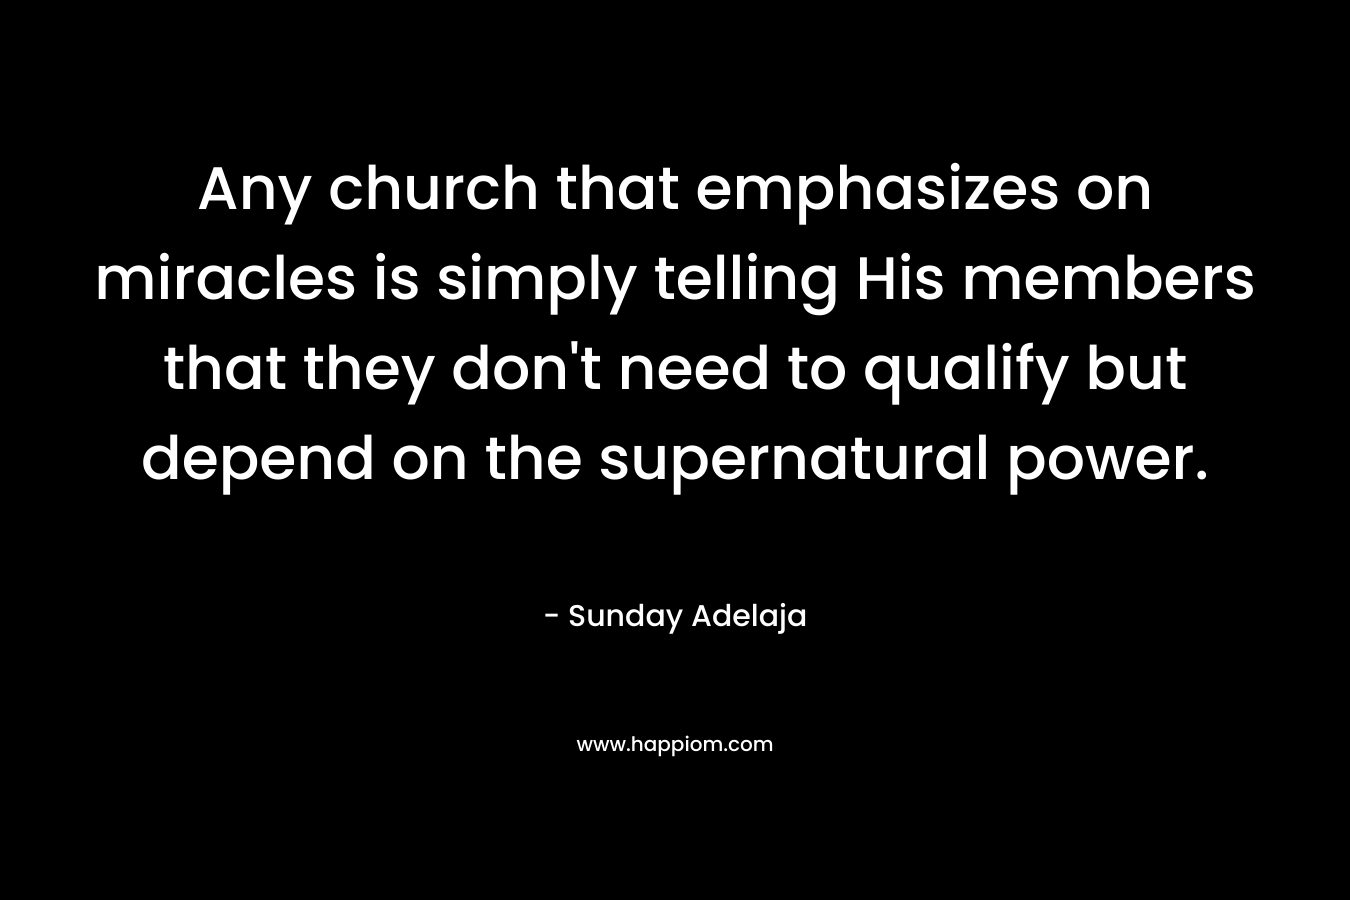 Any church that emphasizes on miracles is simply telling His members that they don't need to qualify but depend on the supernatural power.